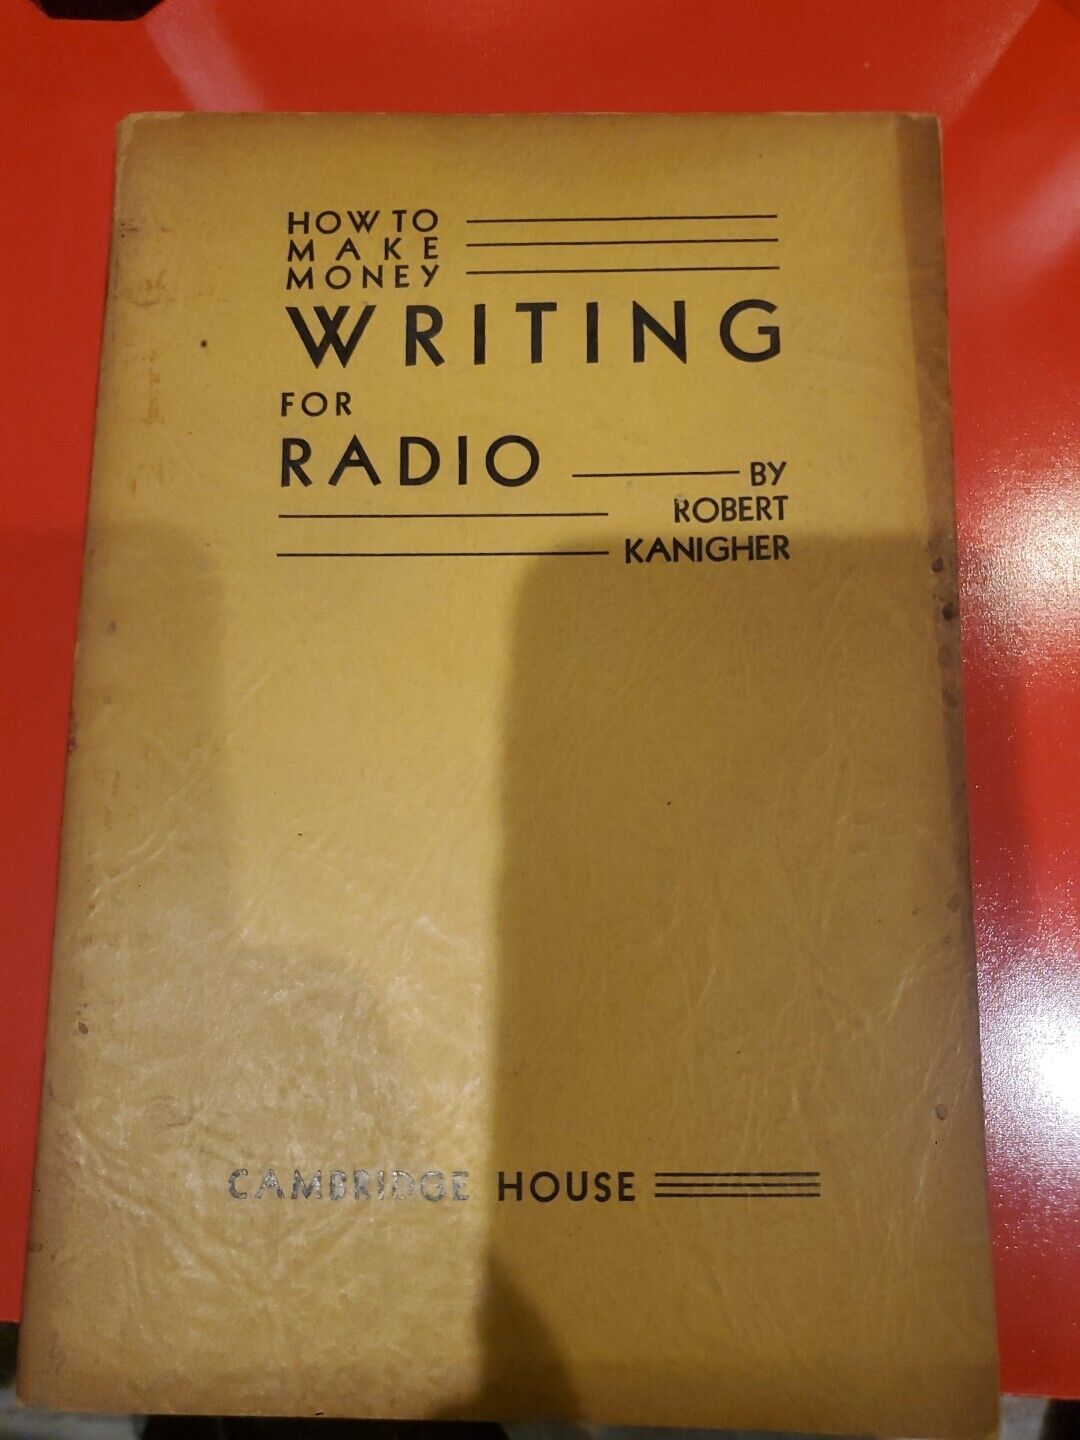 How To Make Money Writing For RADIO By Robert Kanigher Cambridge House